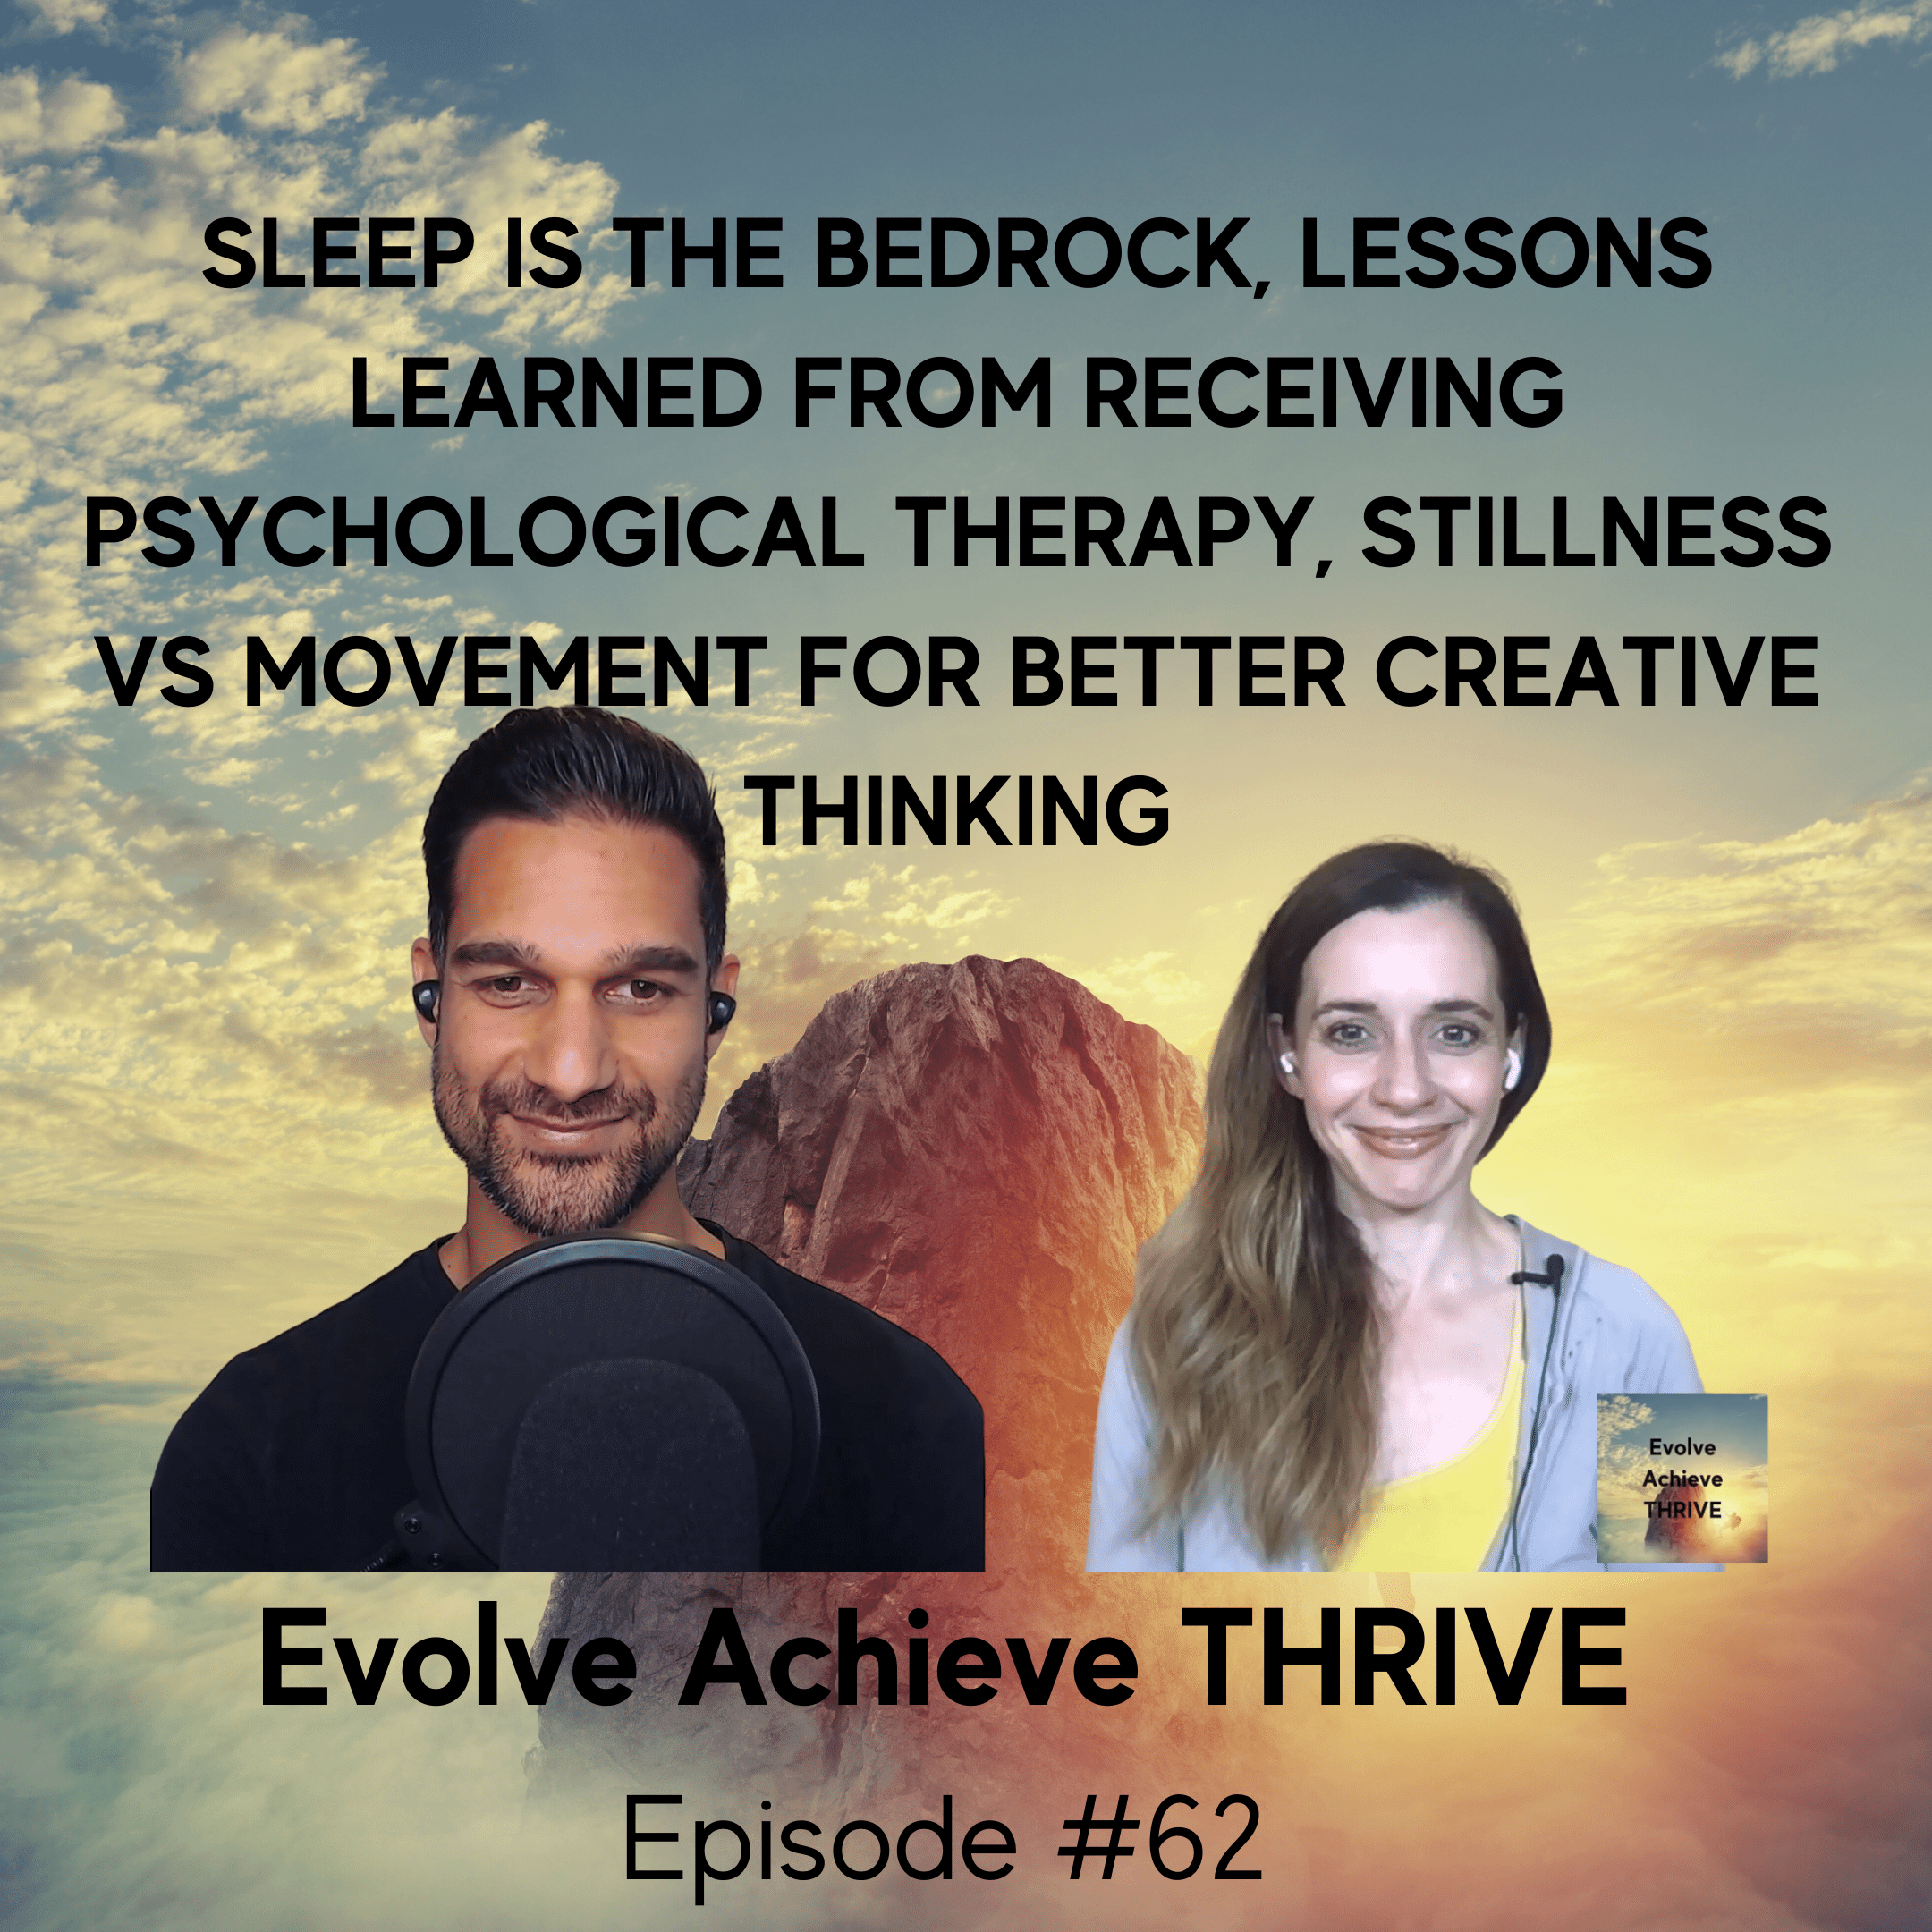 #62 Sleep is the Bedrock, Lessons from Receiving Psychological Therapy, Stillness vs Movement for Better Creative Thinking